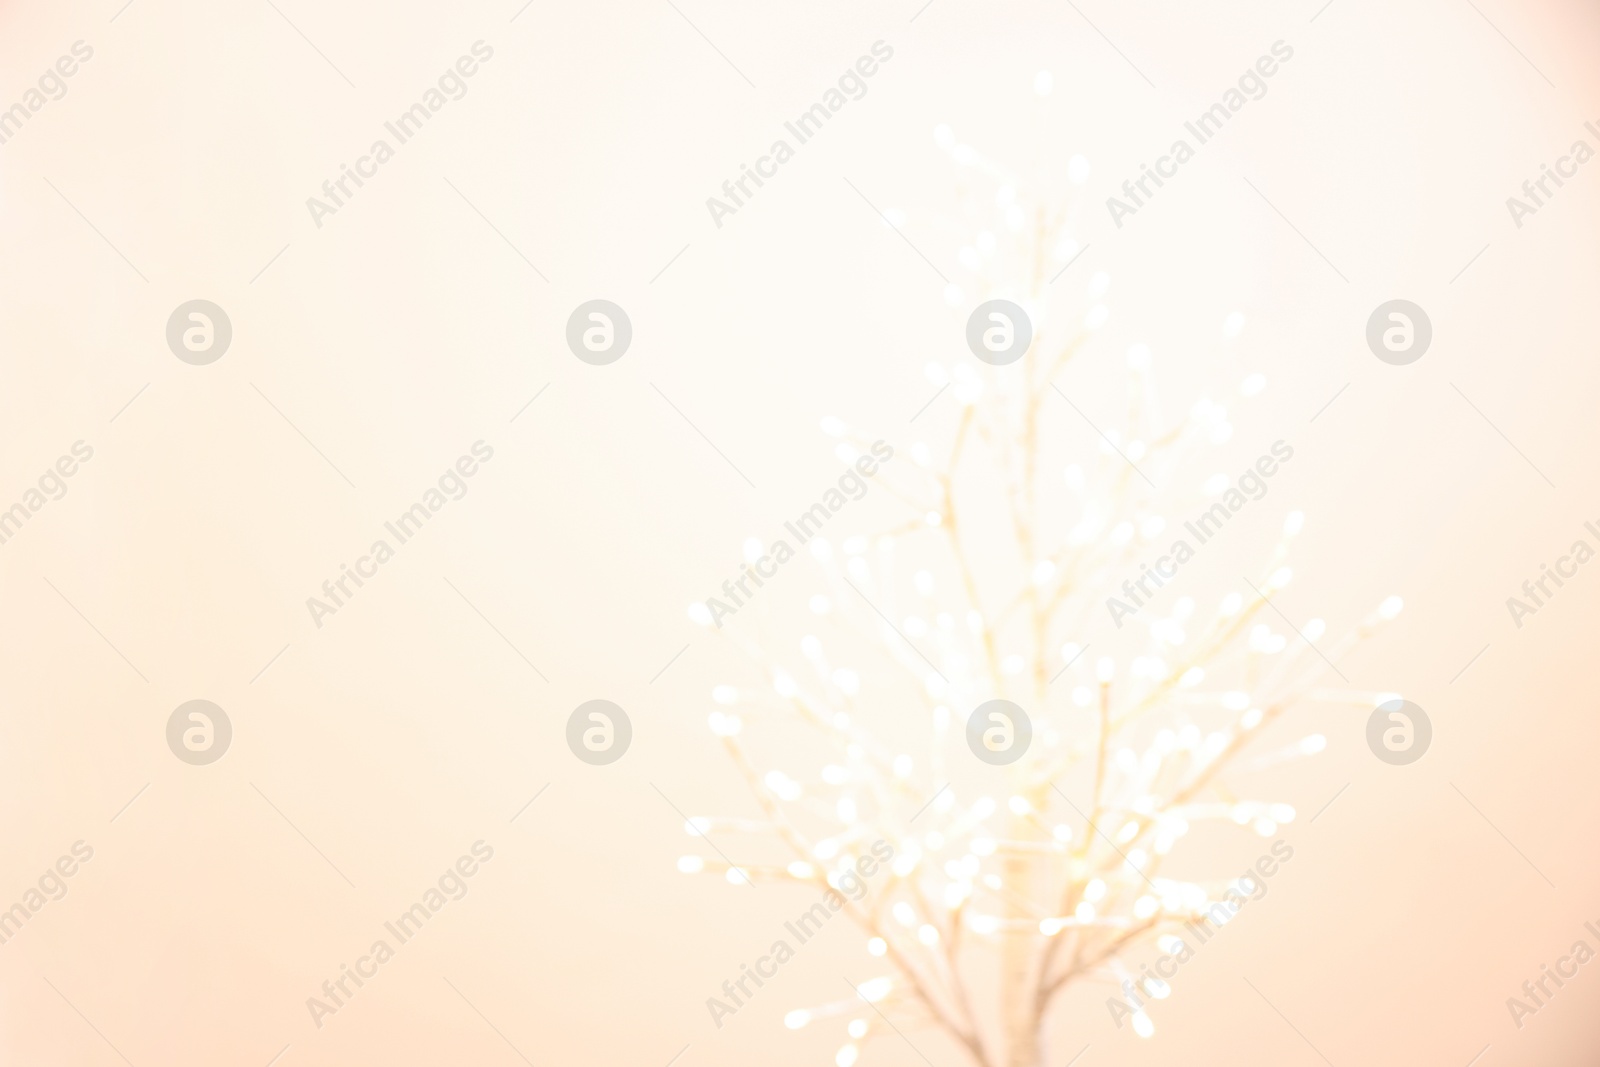 Photo of Decorative tree with lights on beige background, blurred view. Space for text